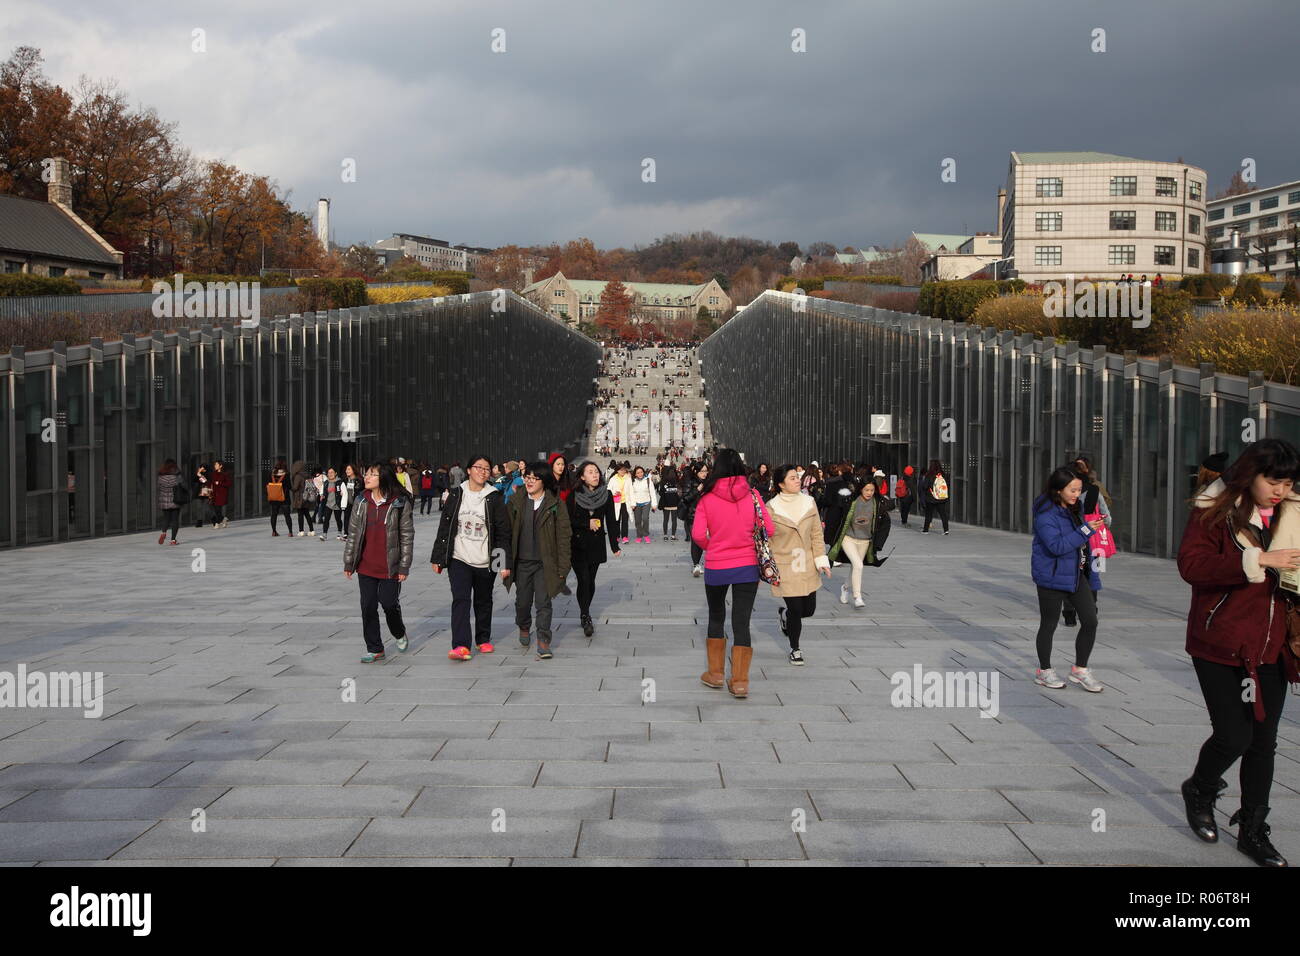 Ewha womans university in Seoul world’s largest women’s university with nearly 25,000 students, South Korea Stock Photo